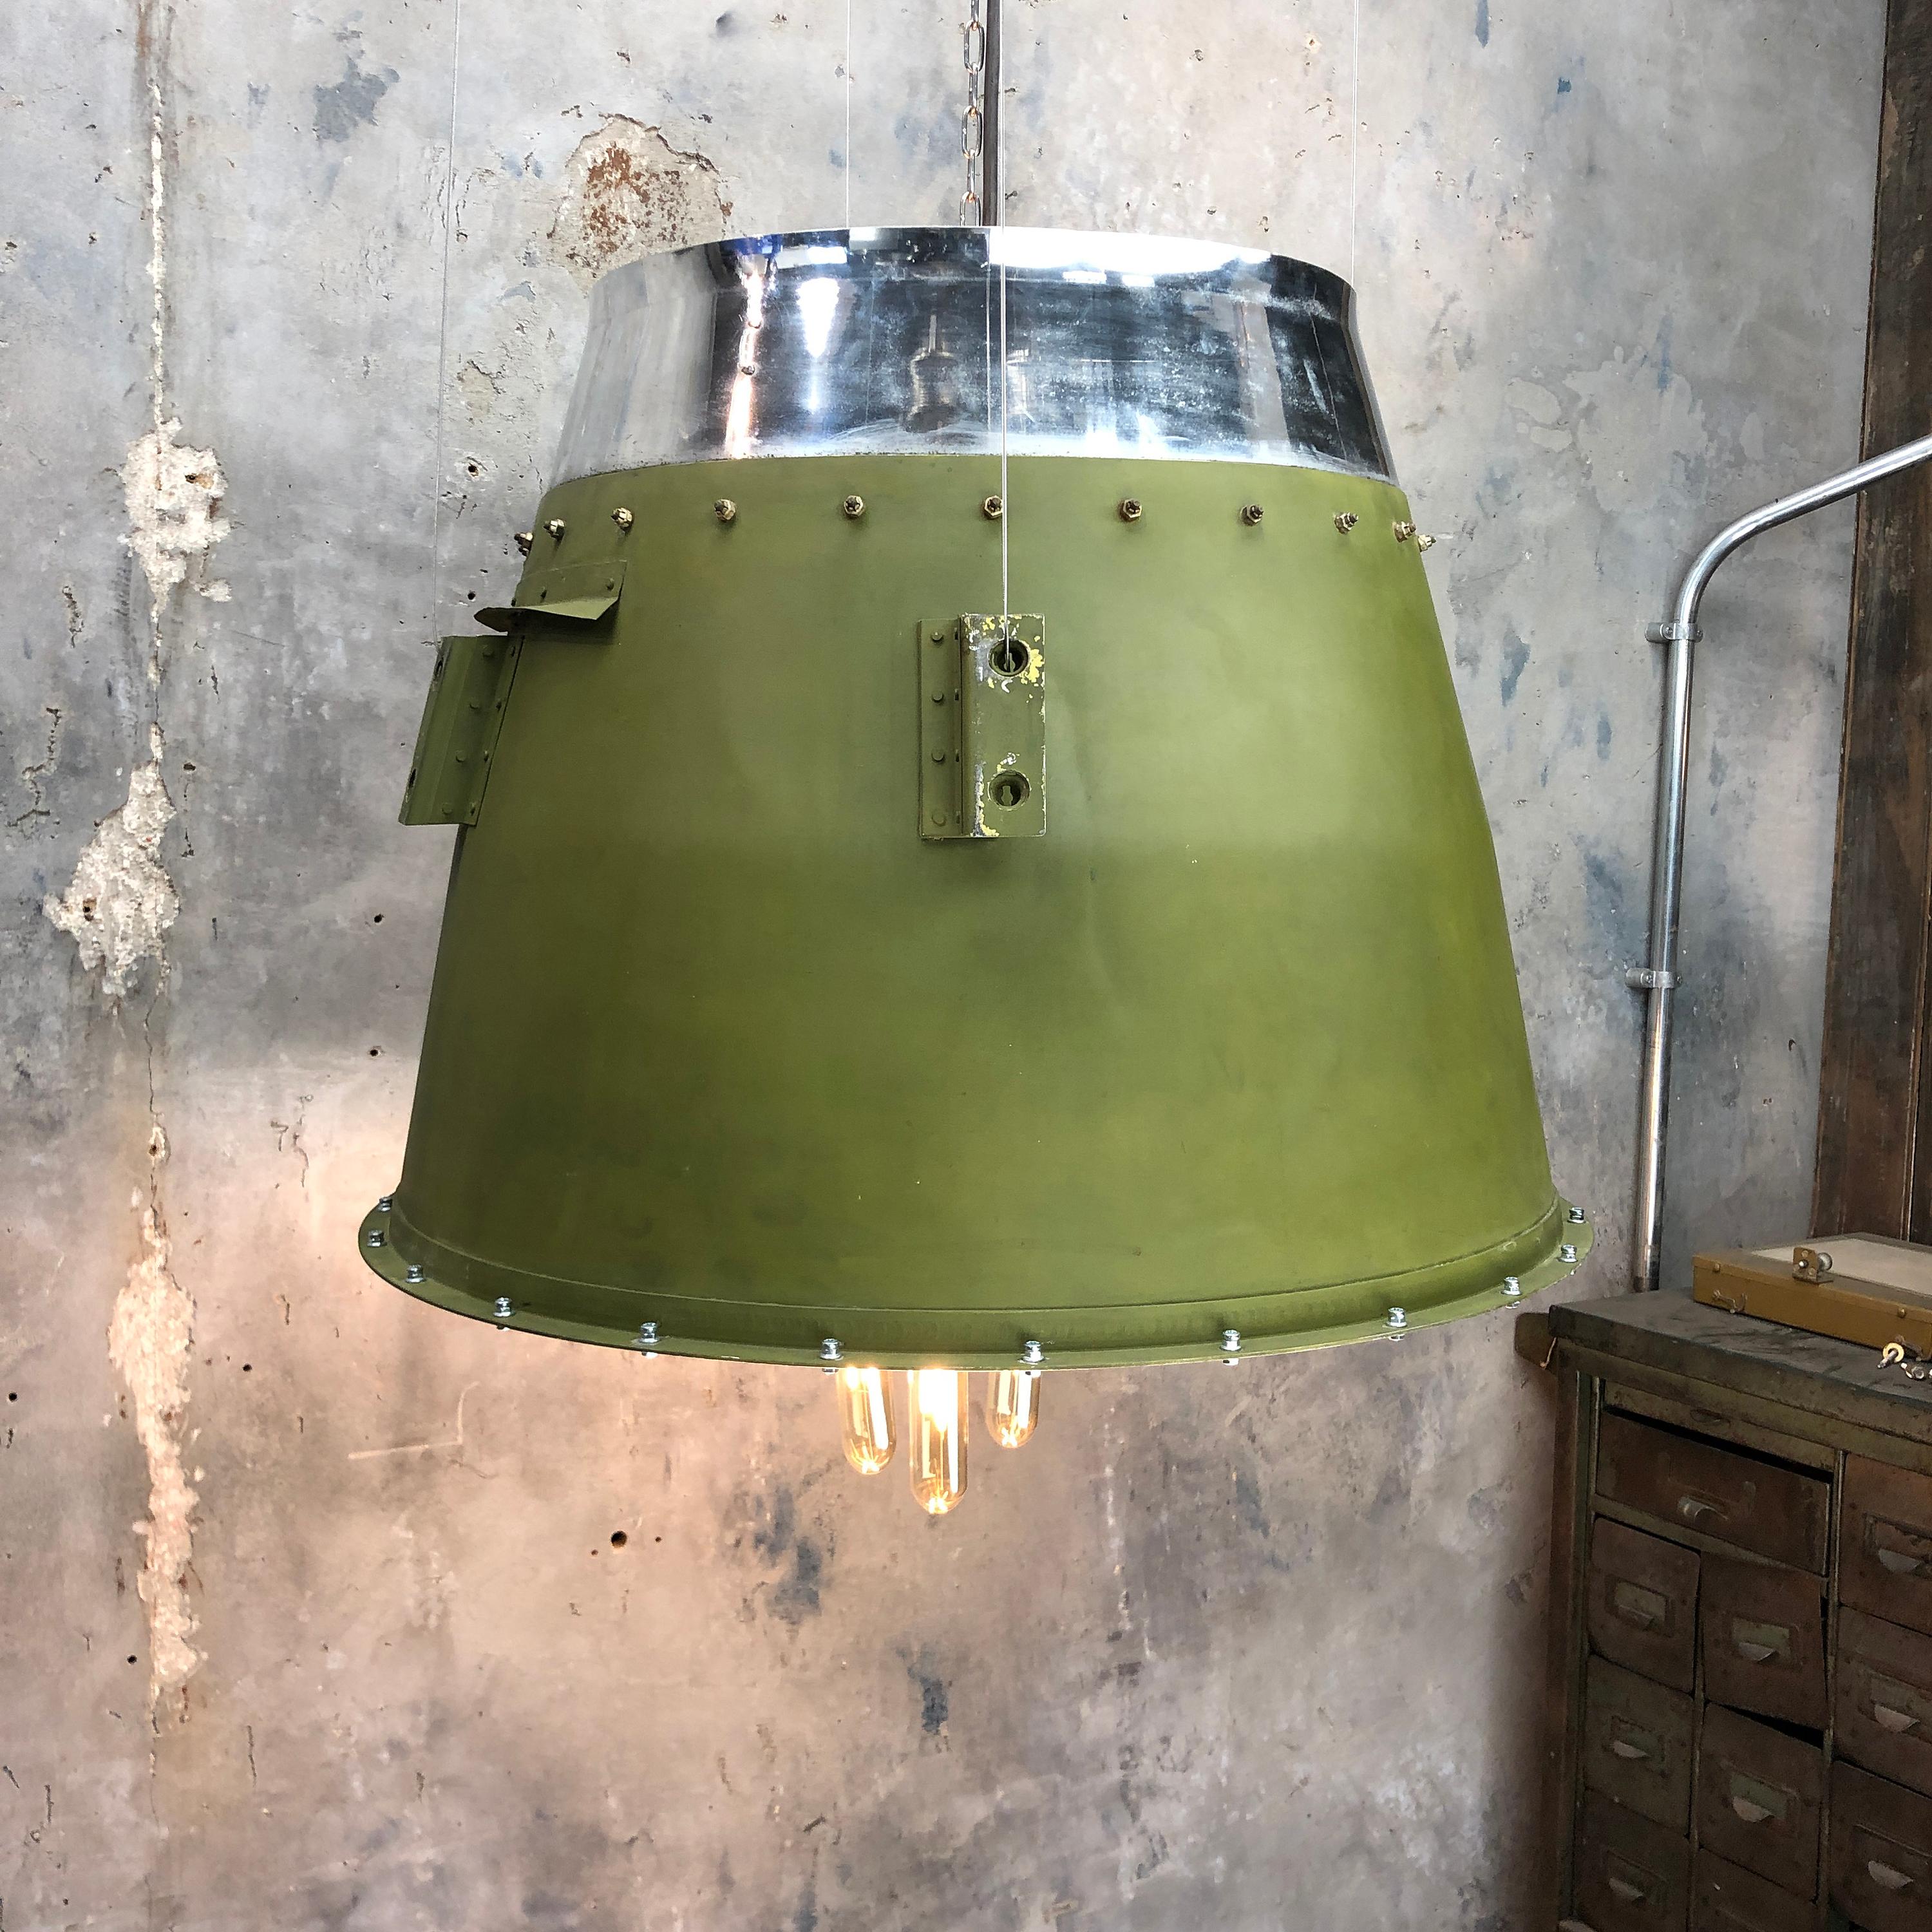 1980s Canadian Bombardier Jet Engine Cowling, Green Industrial Pendant Light 10